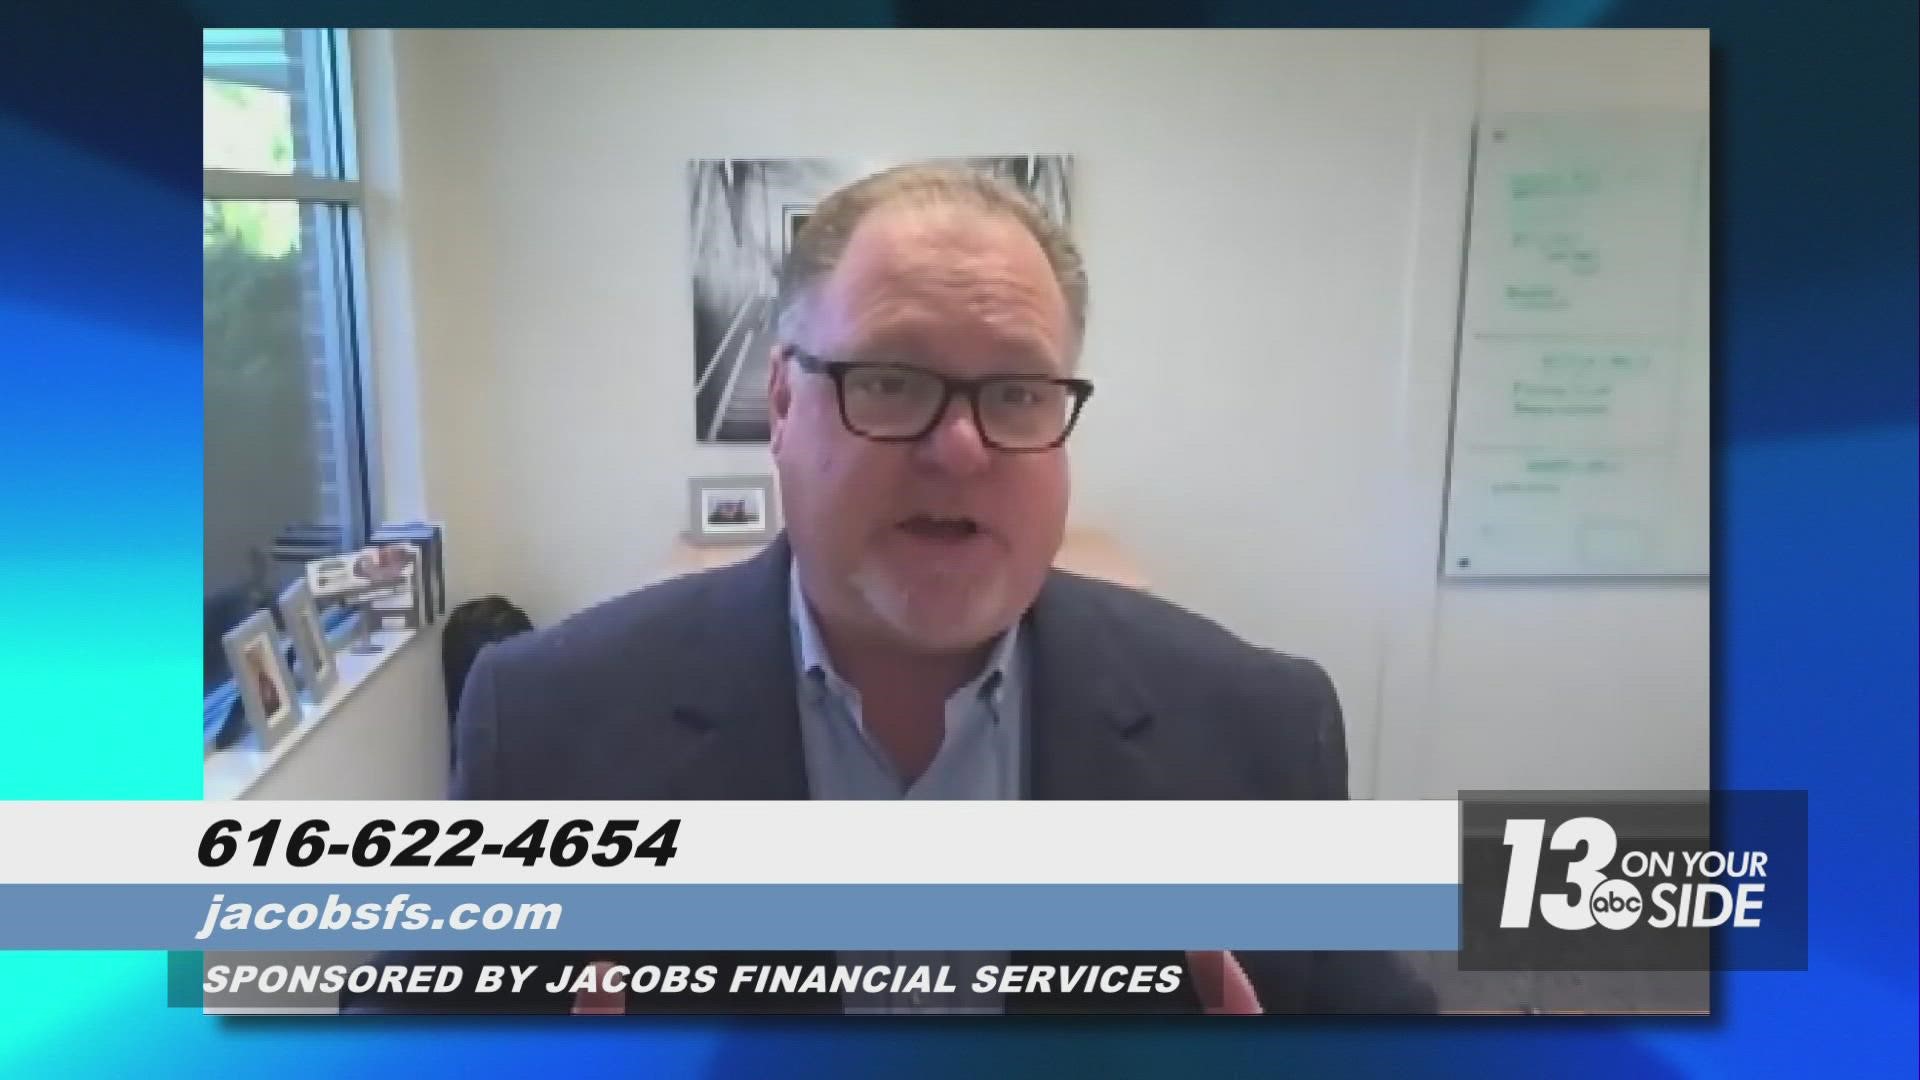 Is retirement creeping up on you? Tom Jacobs from Jacobs Financial Services can help you get started.